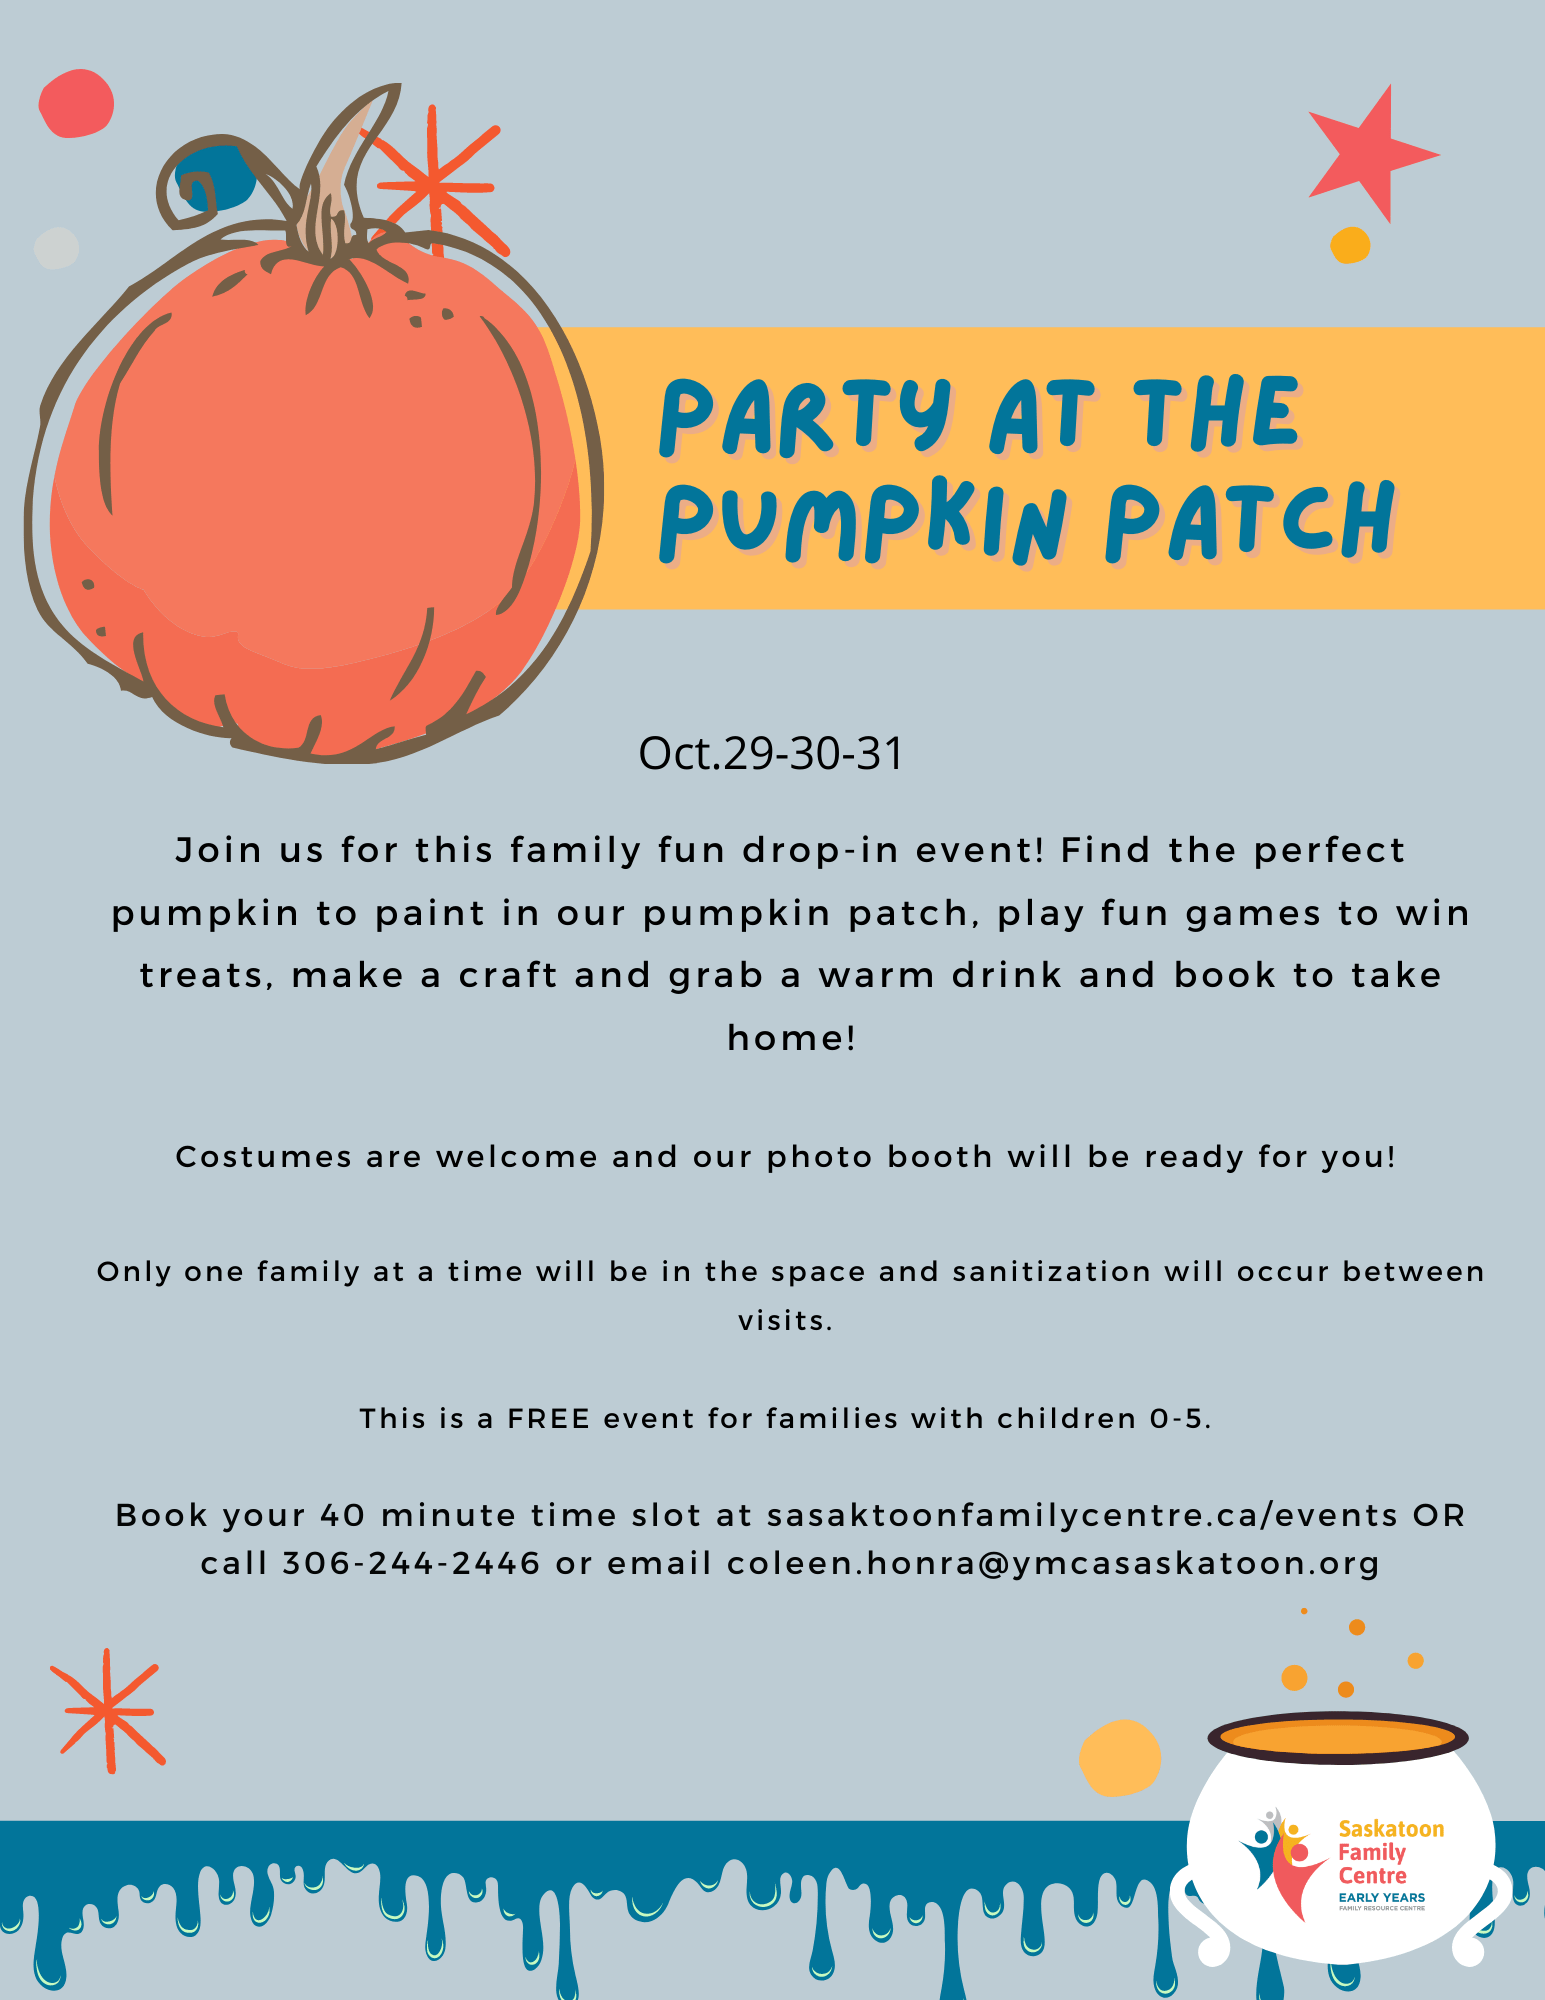 Party at the Pumpkin Patch